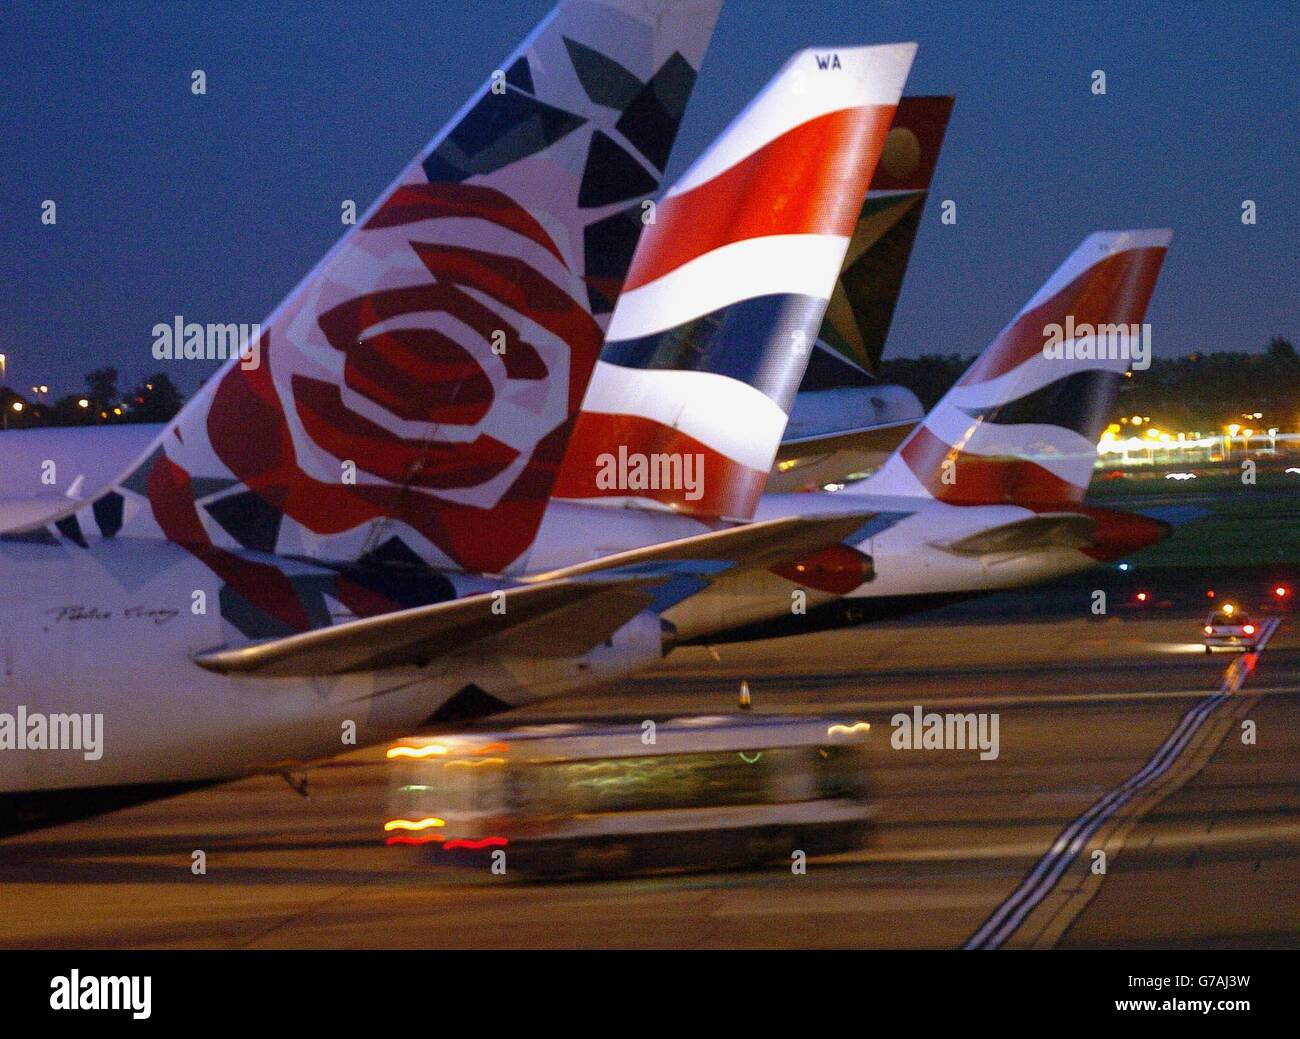 British Airways has stopped taking bookings for flights over the August Bank Holiday weekend because of the threat of a strike by baggage handlers and check-in staff. The airline said it was not taking bookings for flights leaving UK airports from August 27 to 30 as well as for those arriving in Britain. British Airways Aircraft At Heathrow. Stock Photo